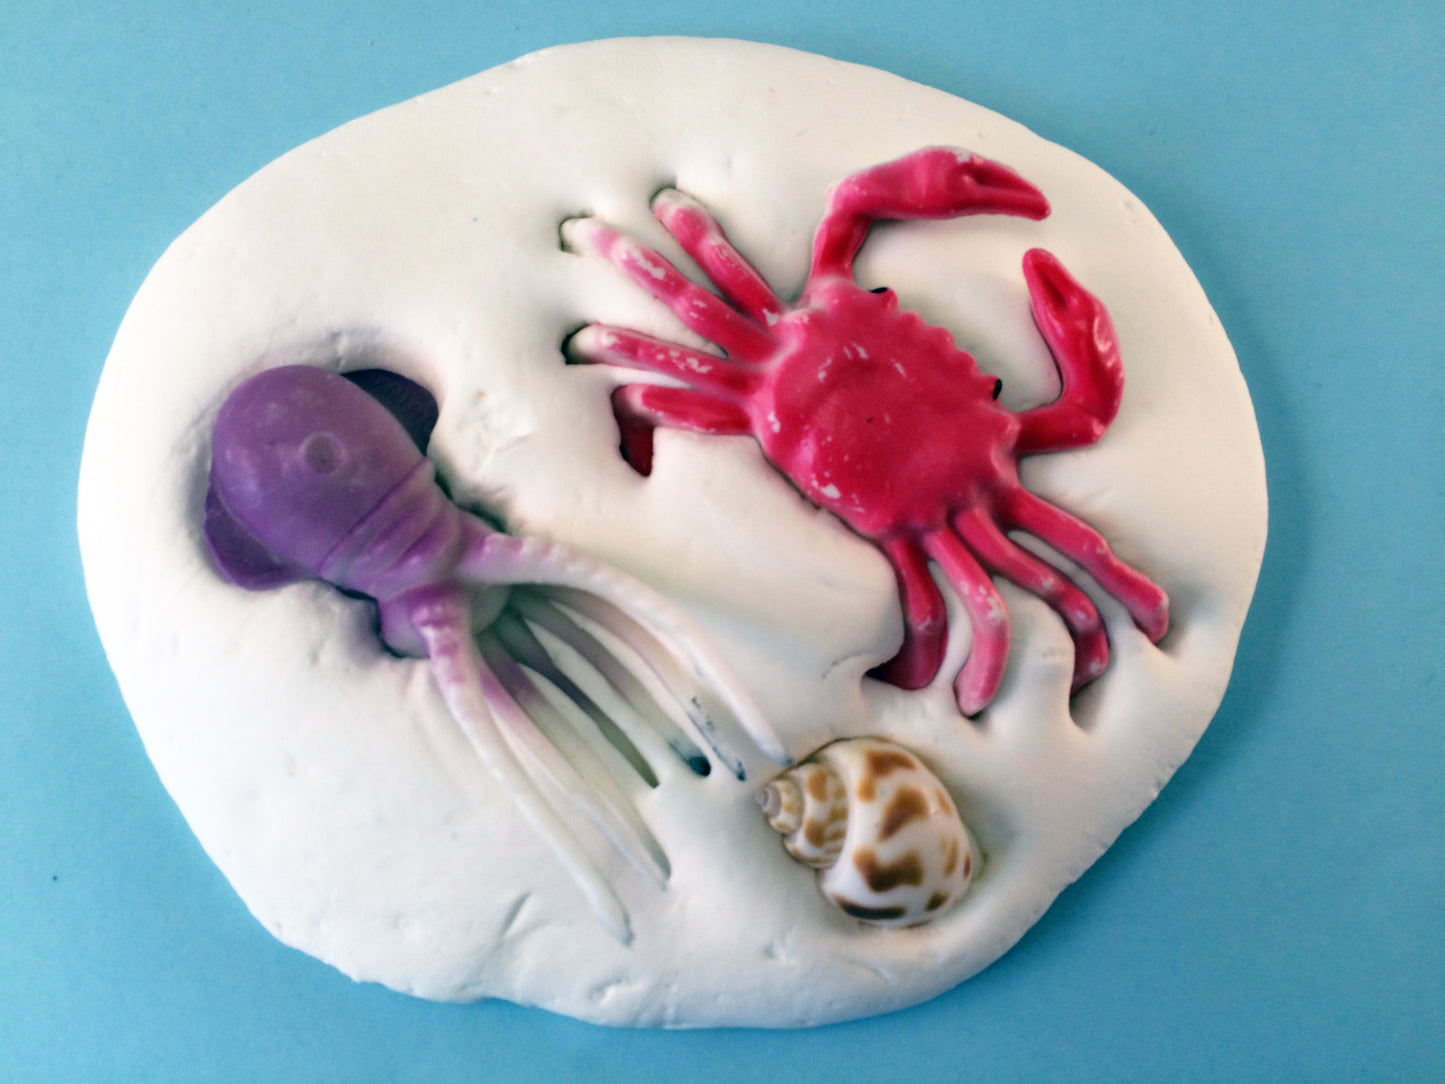 Science and art activity inspired by the book Over in an Ocean in a Coral Reef. Use sea creatures, starfish, and seashells to make clay imprints